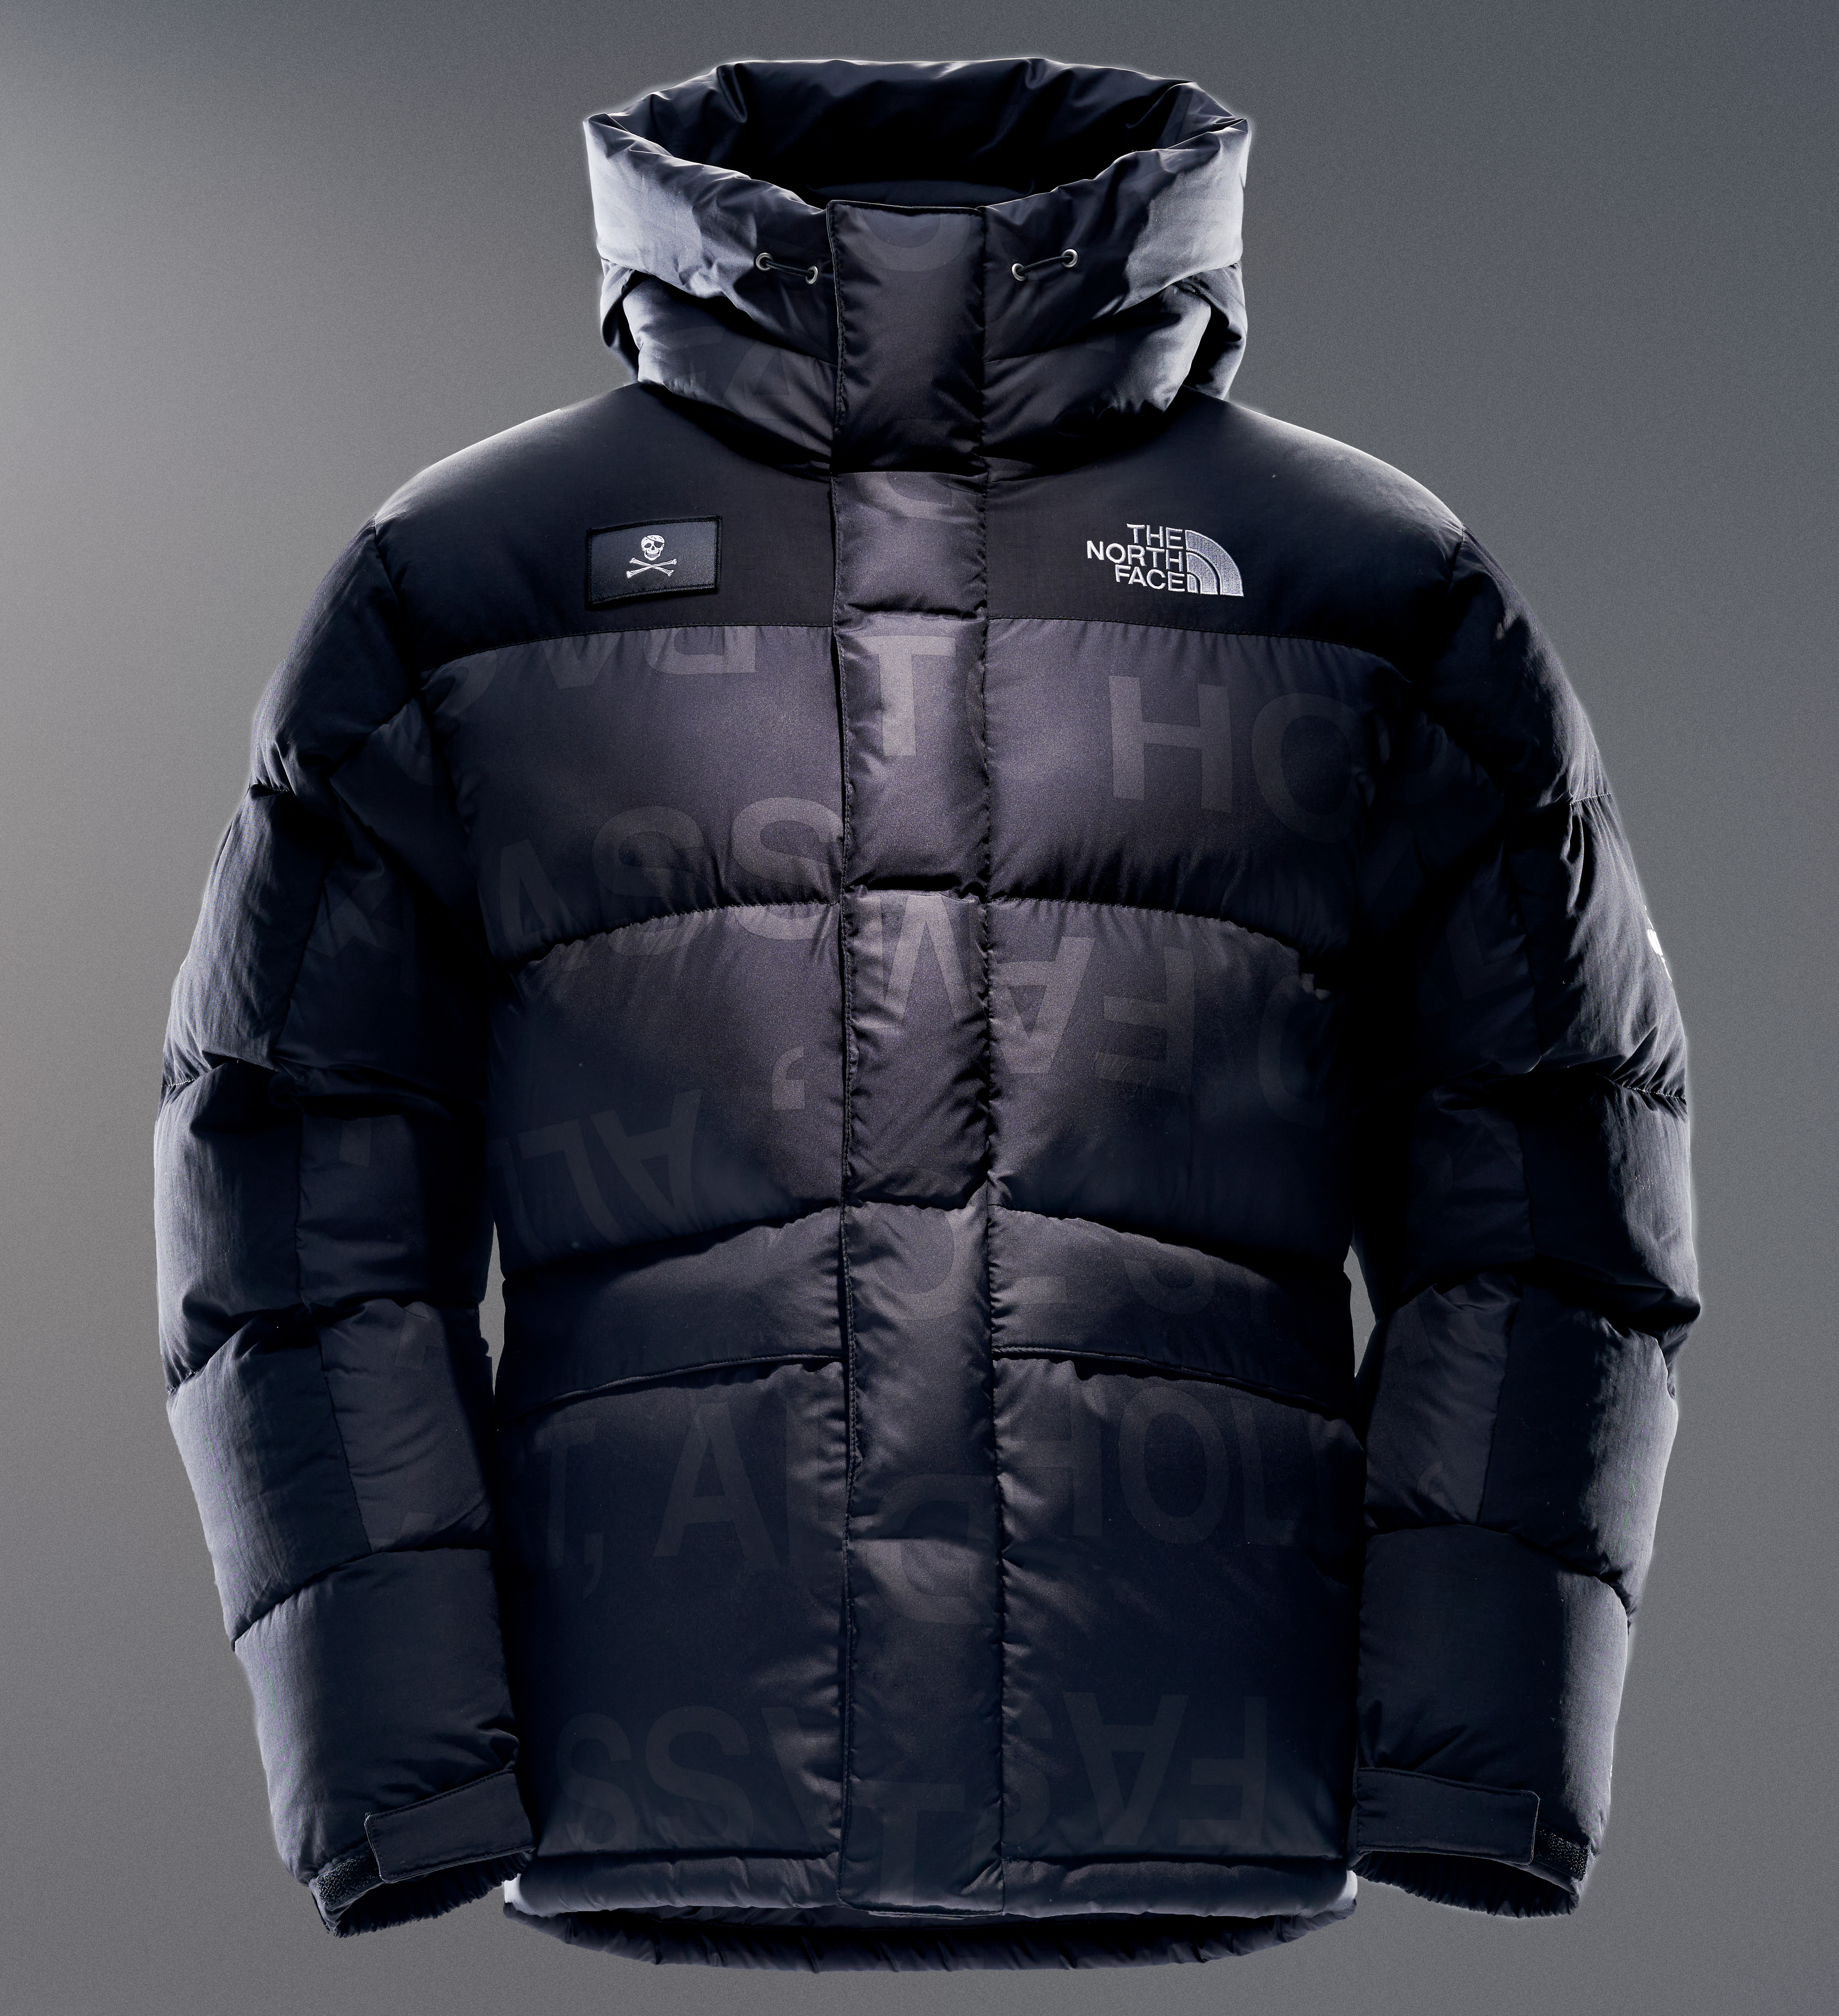 The North Face Conrad Anker Collection